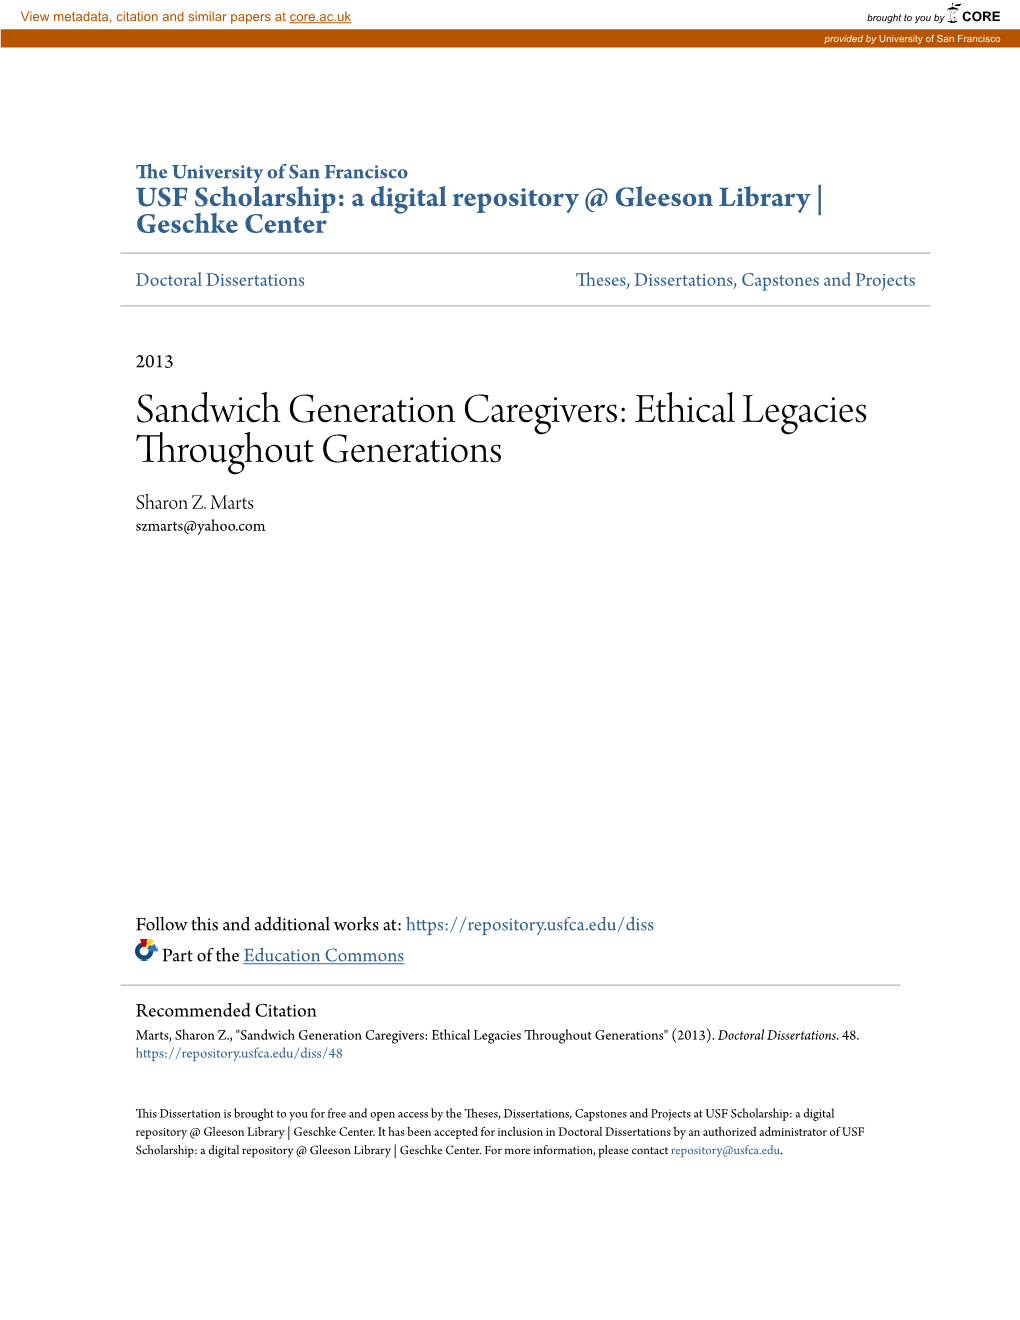 Sandwich Generation Caregivers: Ethical Legacies Throughout Generations Sharon Z